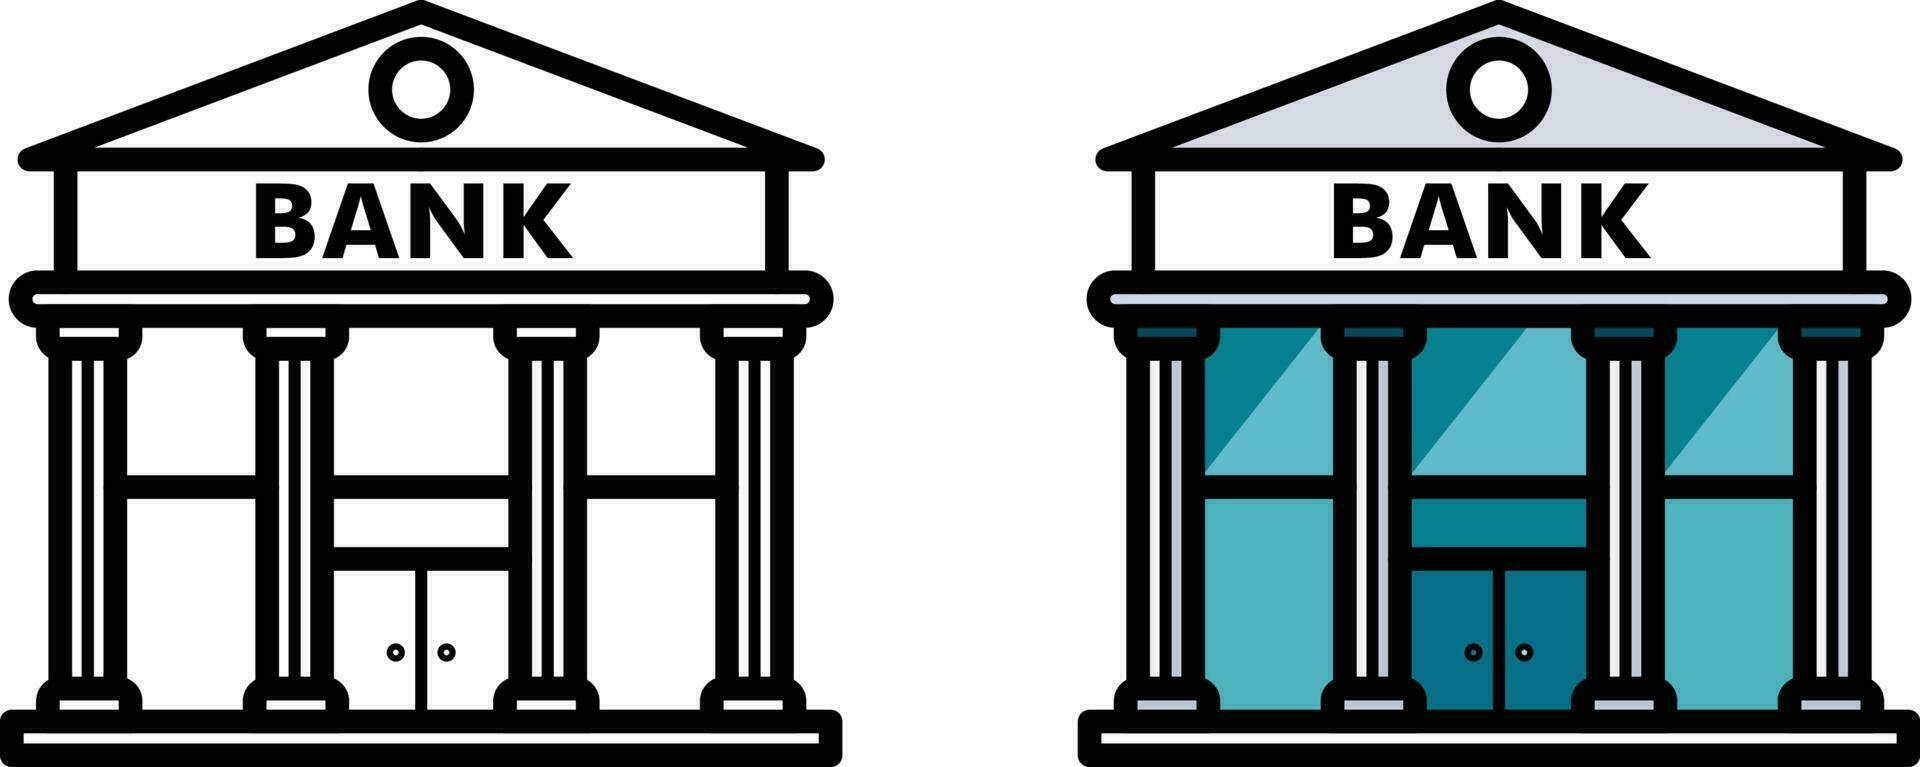 Federal reserve bank building flat style vector graphic and outlined